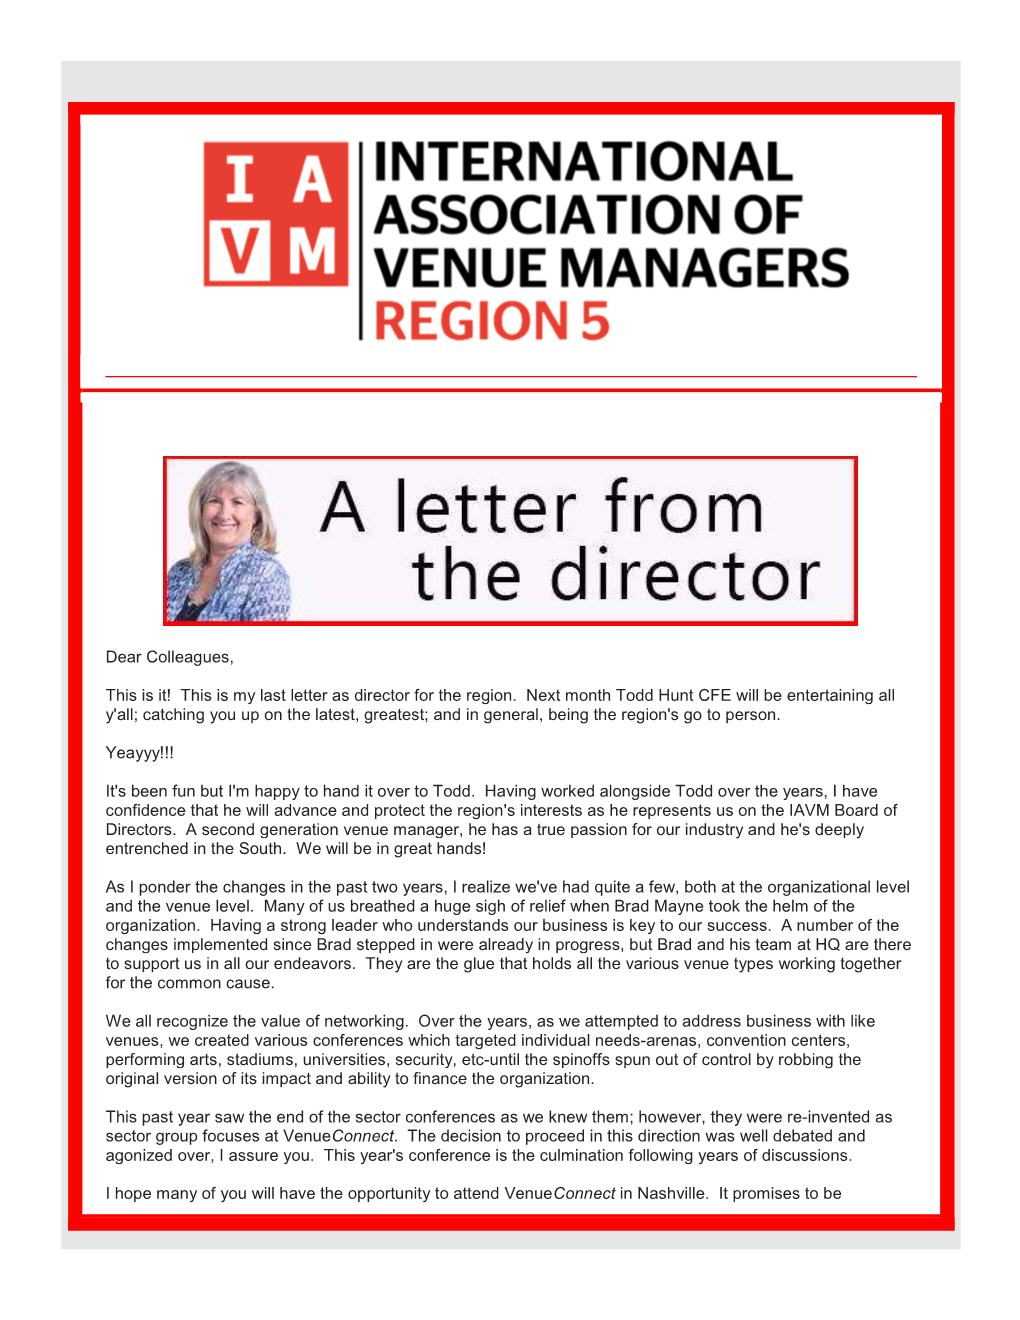 This Is My Last Letter As Director for the Region. Next Month Todd Hunt CFE Will Be Entertaining